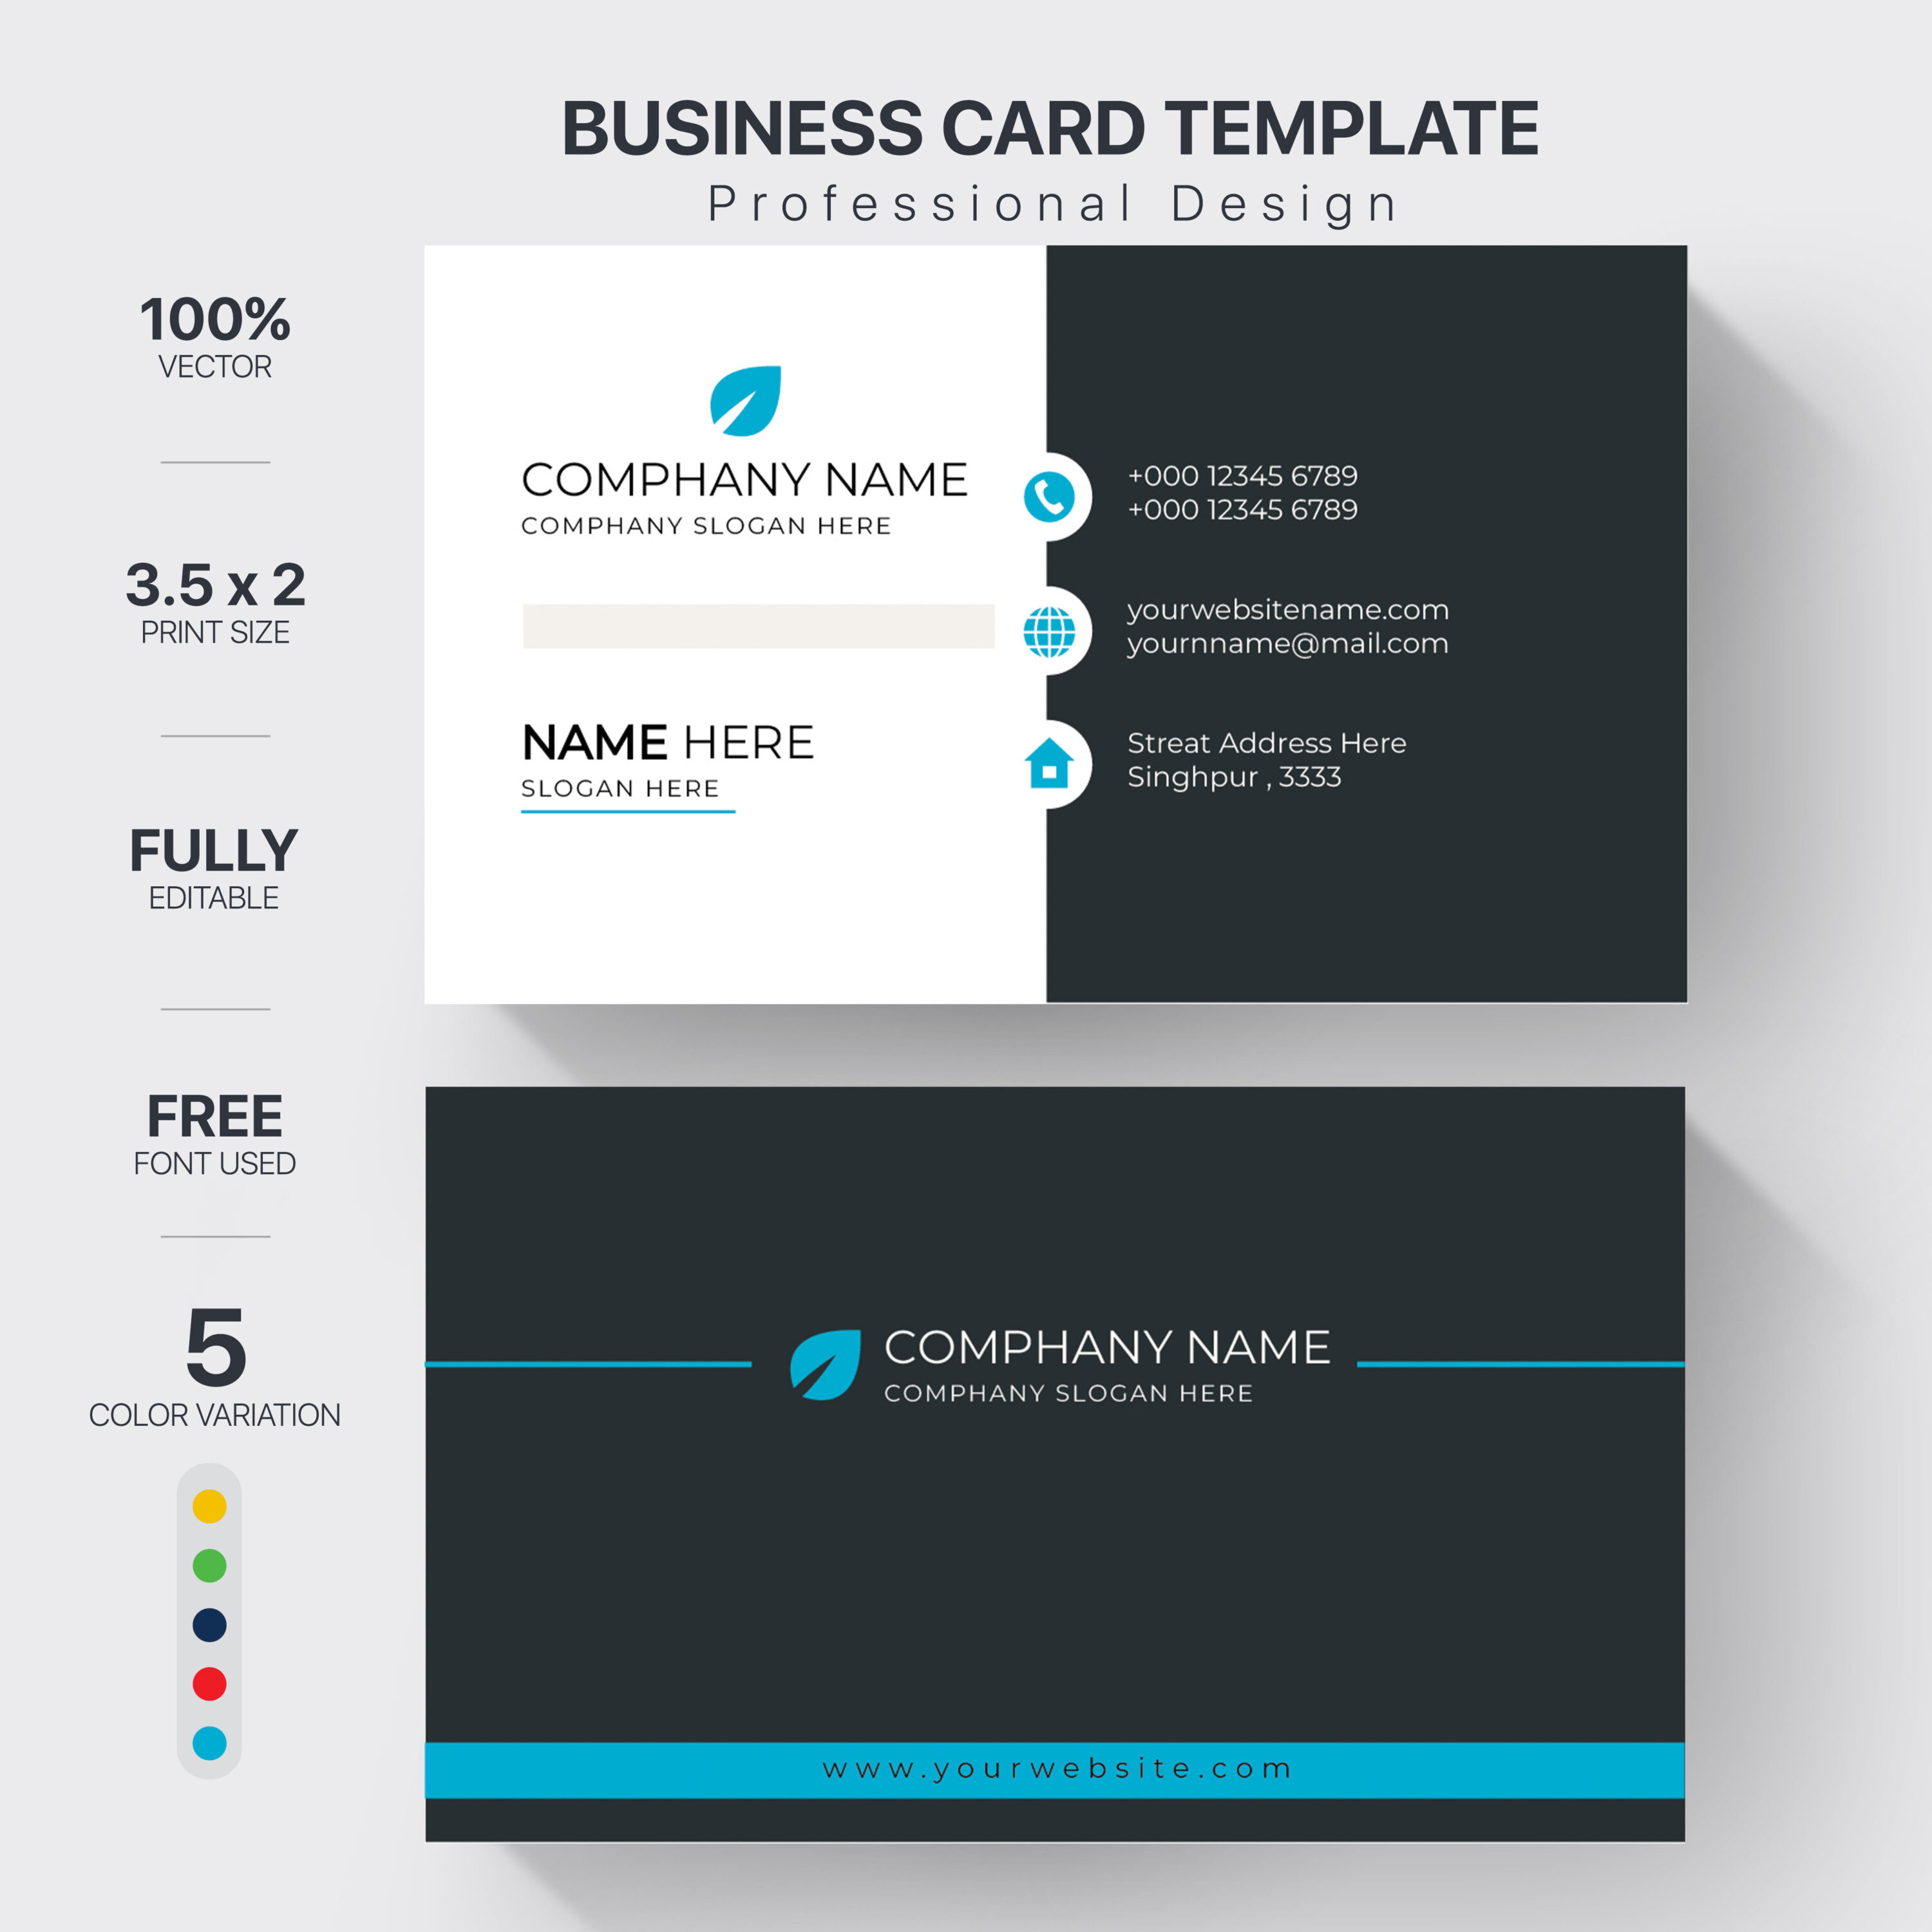 Colorful image double sided business card template.